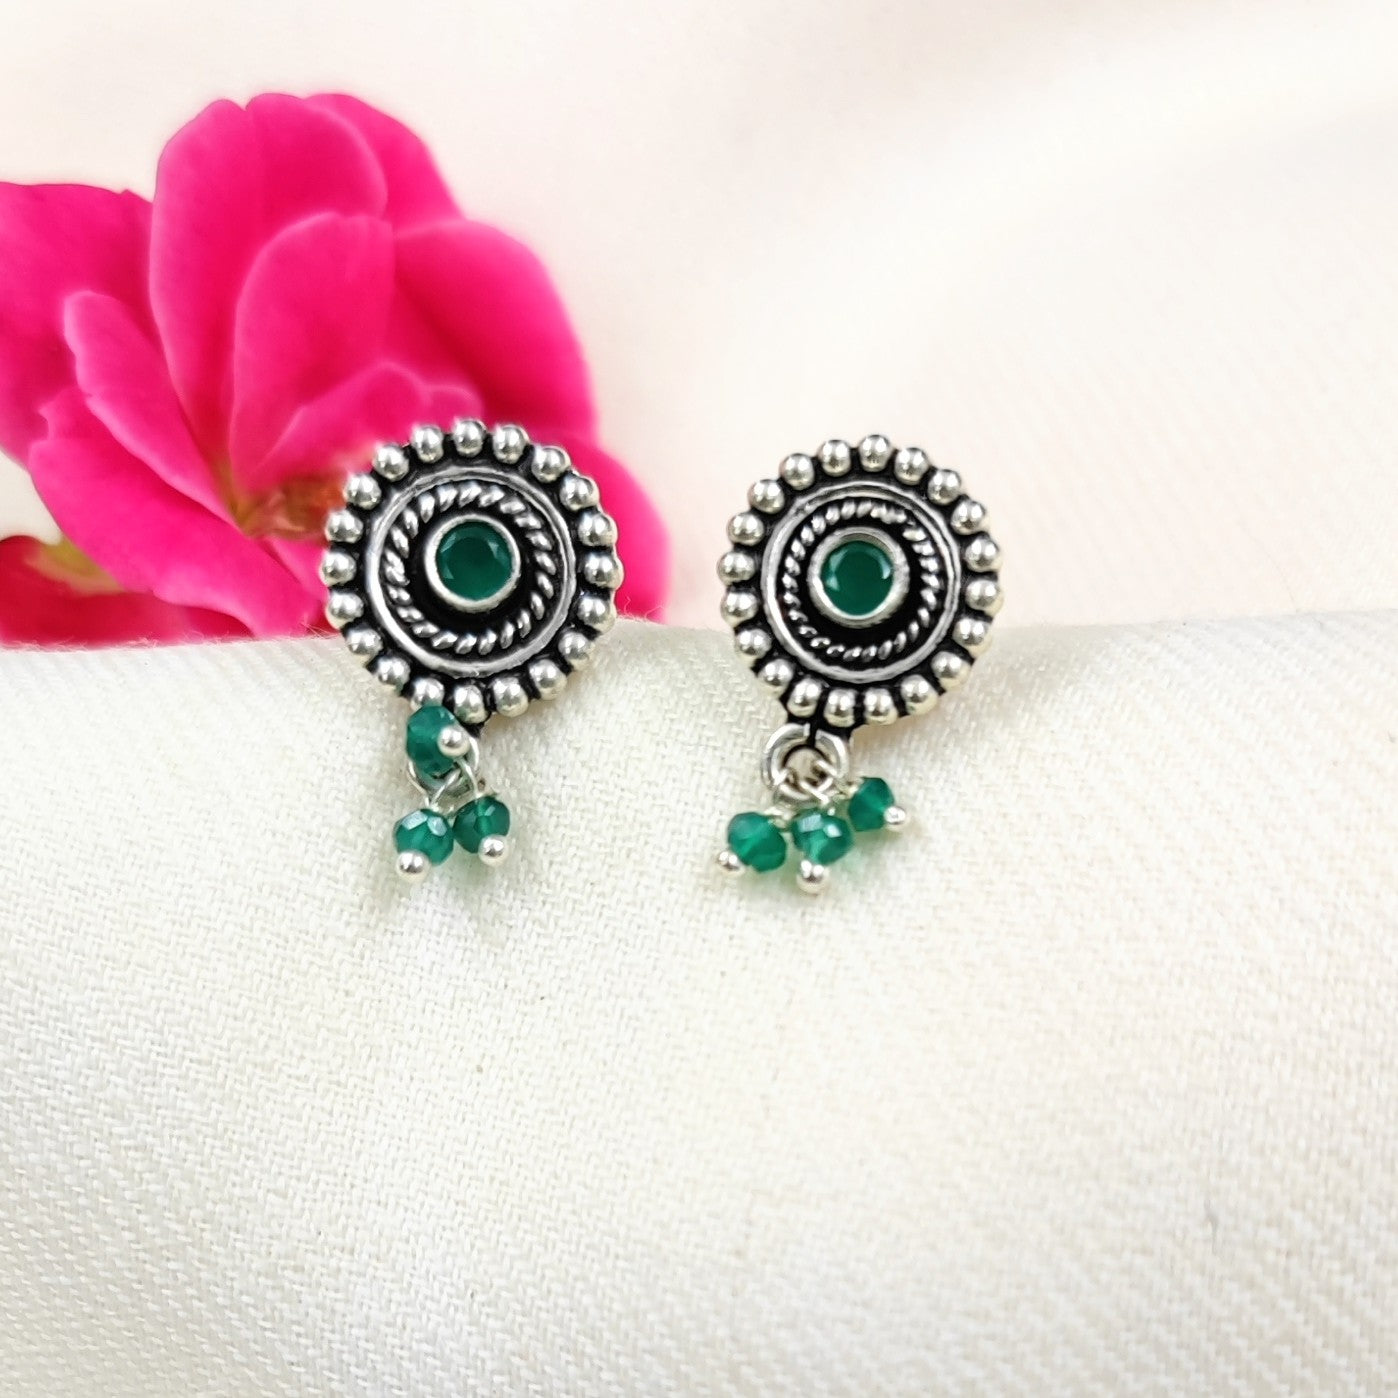 Silver Jewelry Earrings by Jauhri 92.5 Silver - Har Mukesh Studs